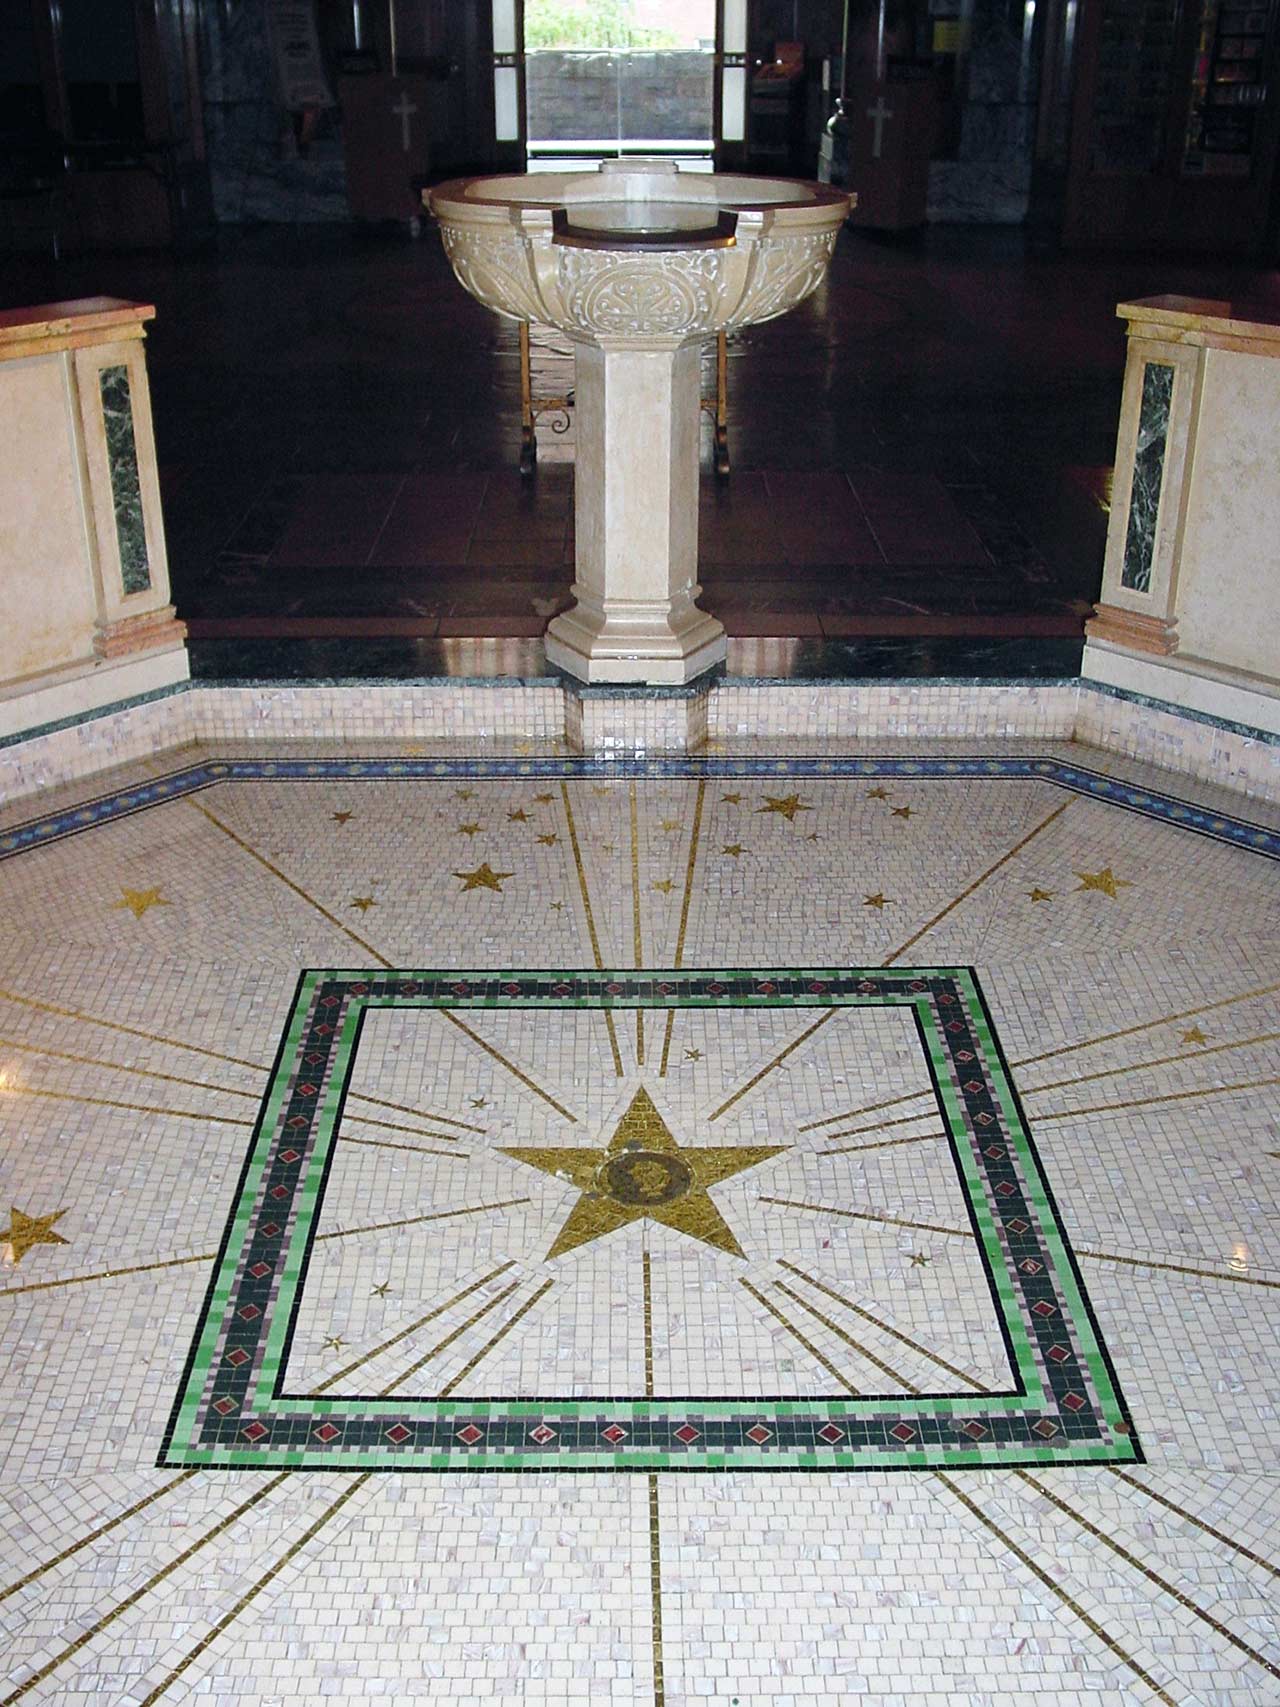 Tilework around the baptistry with stars in the floor.